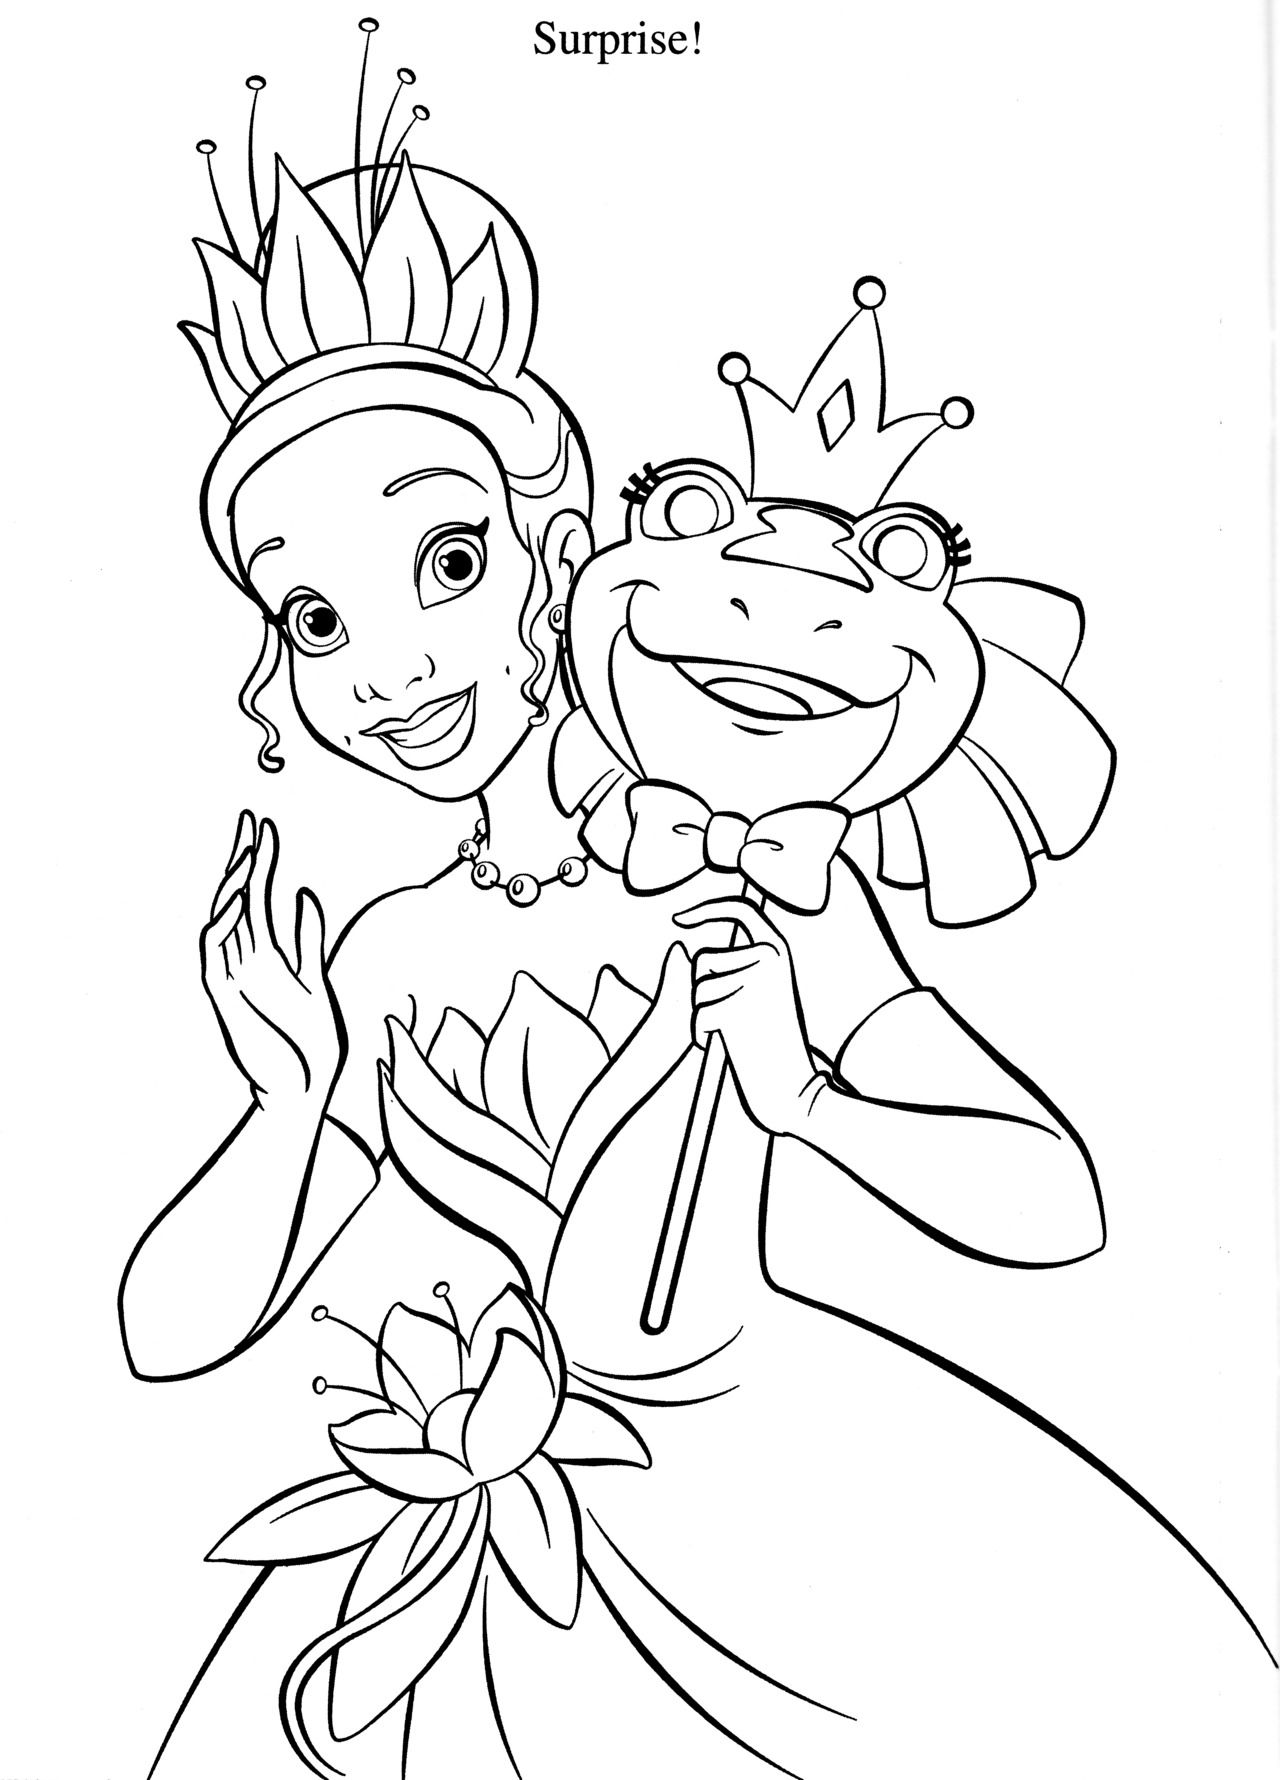 Disney coloring pages frog coloring pages disney princess coloring pages princess coloring pages